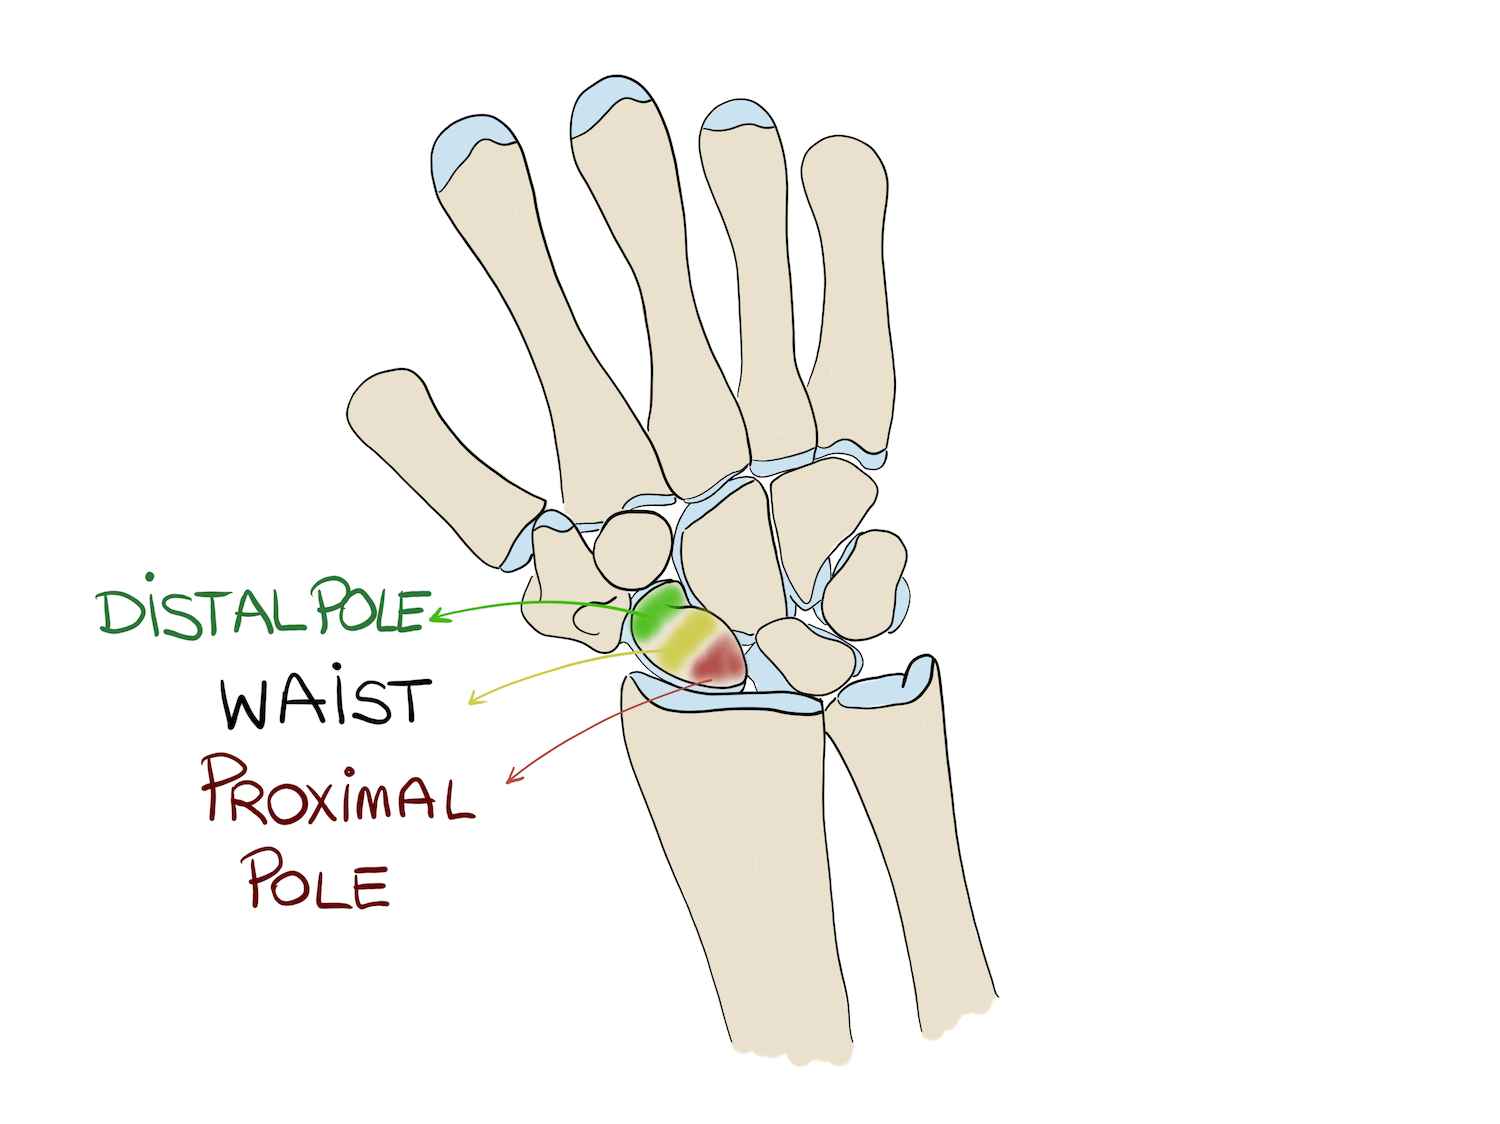 Parts of the scaphoid